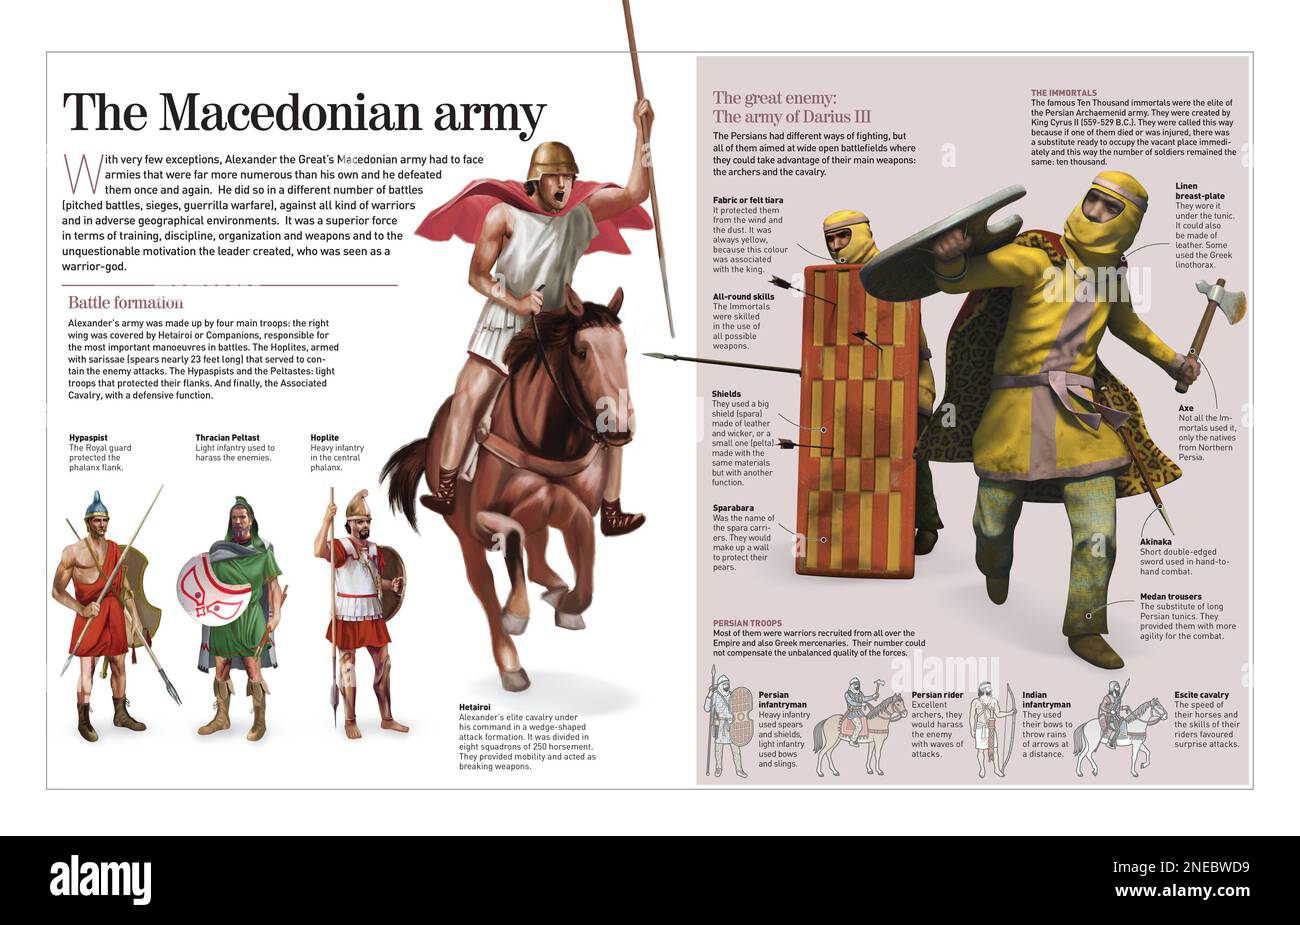 Infographic about the Macedonian army ruled by Alexander the Great and his worst enemy, the Army of Darius III (Persian). [Adobe InDesign (.indd); 4960x3188]. Stock Photo